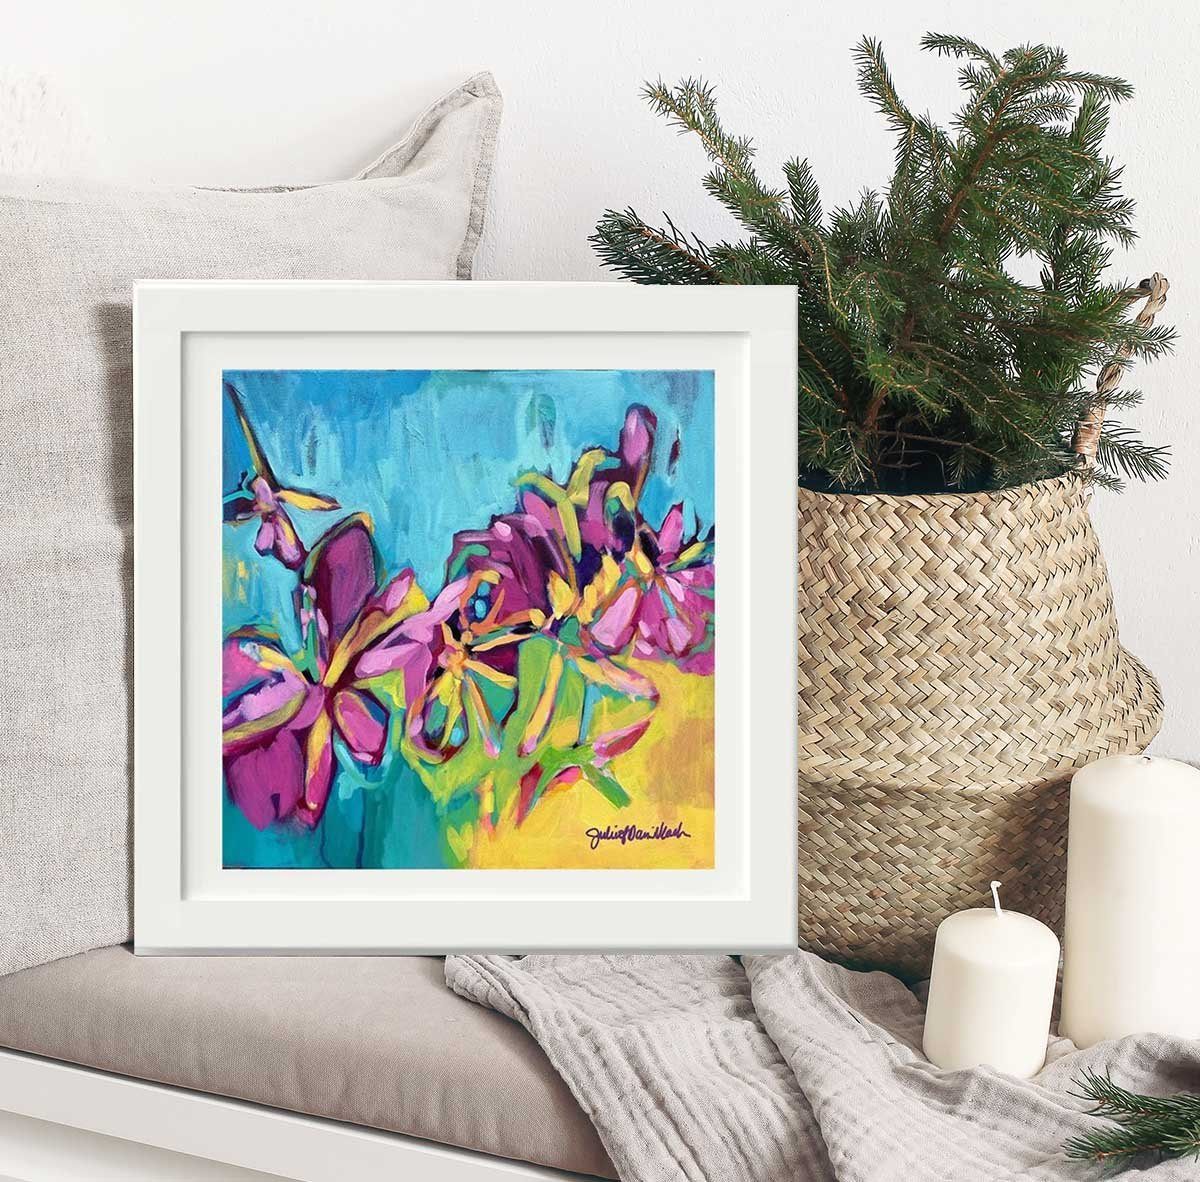 Art prints for your walls at home and in the office. Add value and experience the many positive benefits of art in your space. 